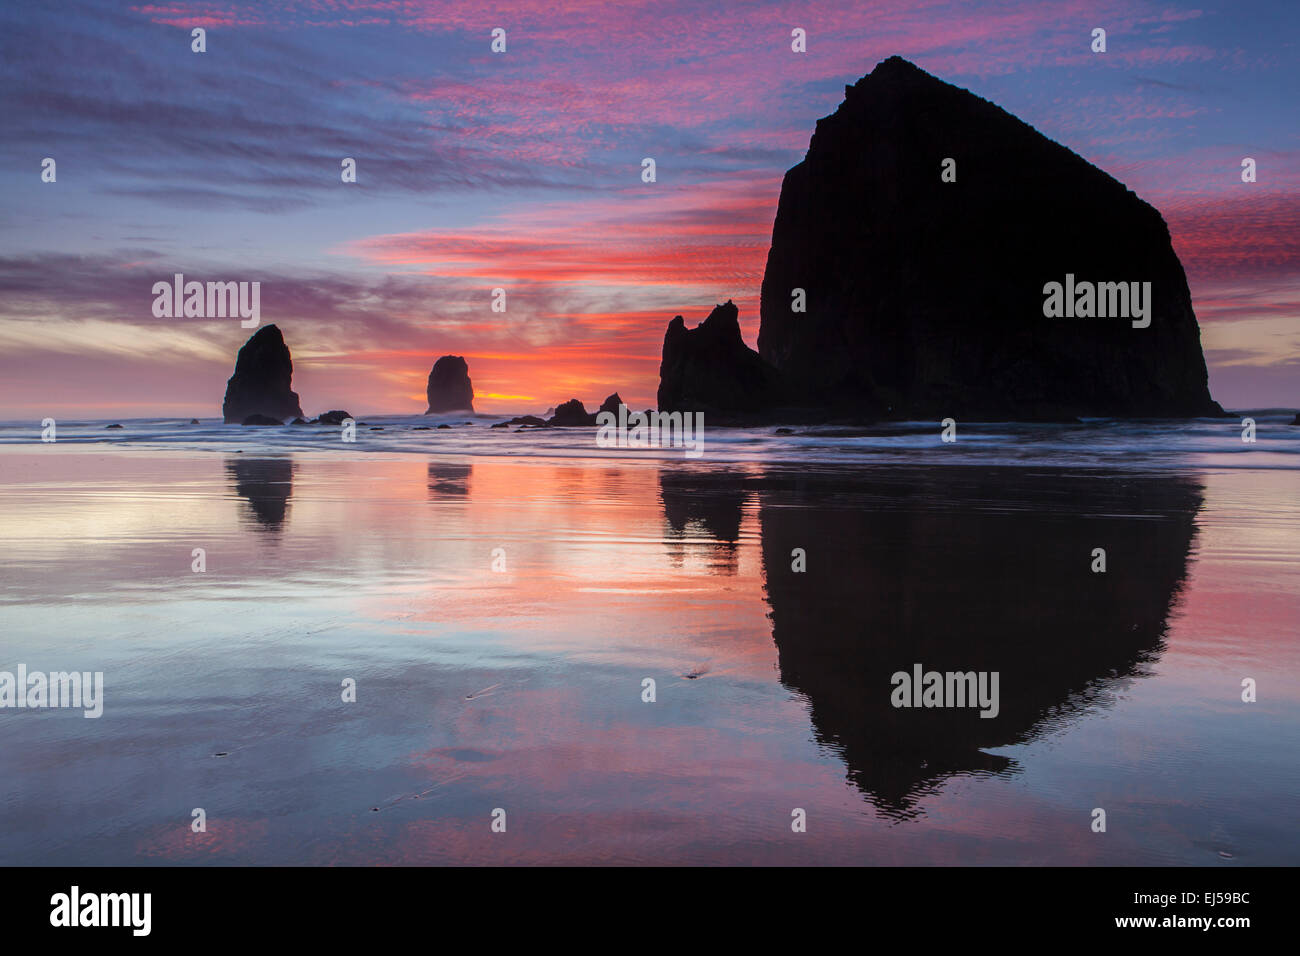 Sunset over Haystack Rock and other sea stacks at Cannon Beach, Oregon, USA. Stock Photo